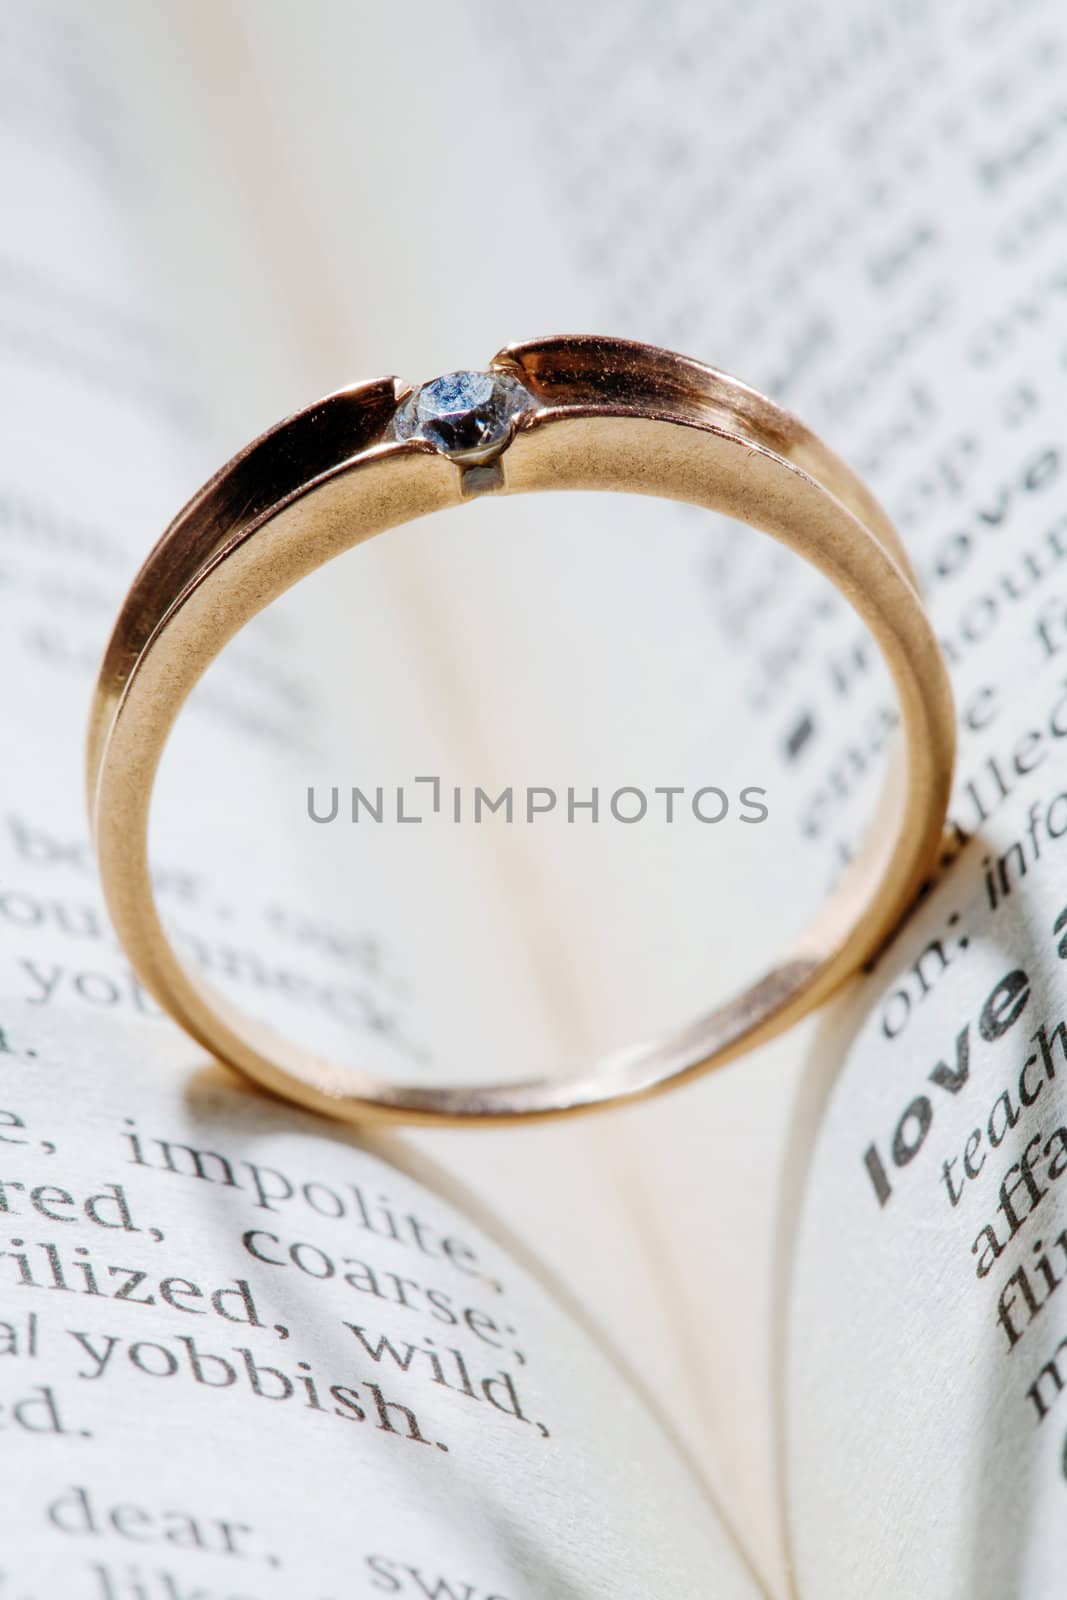 An image of a ring with shadow of a heart